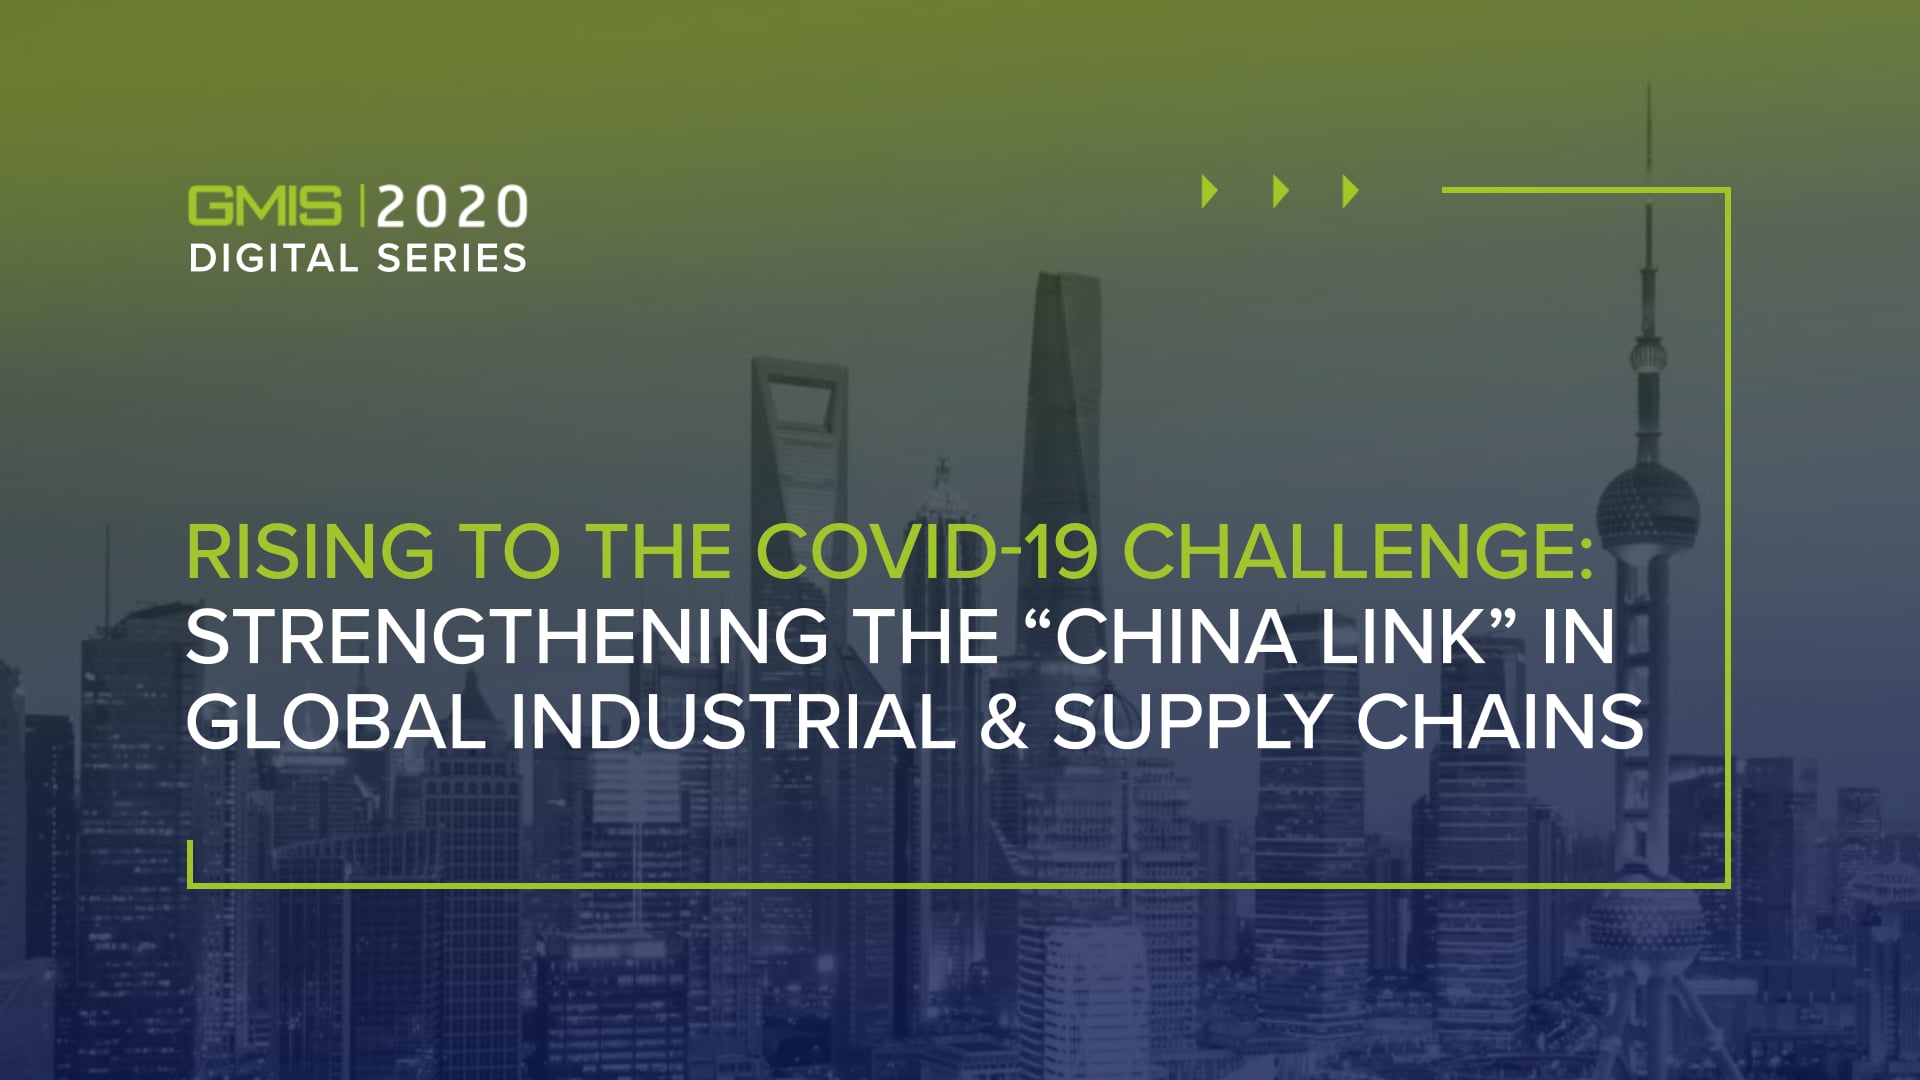 Rising to the COVID-19 Challenge: Strengthening the “China Link” in Global Industrial & Supply Chains